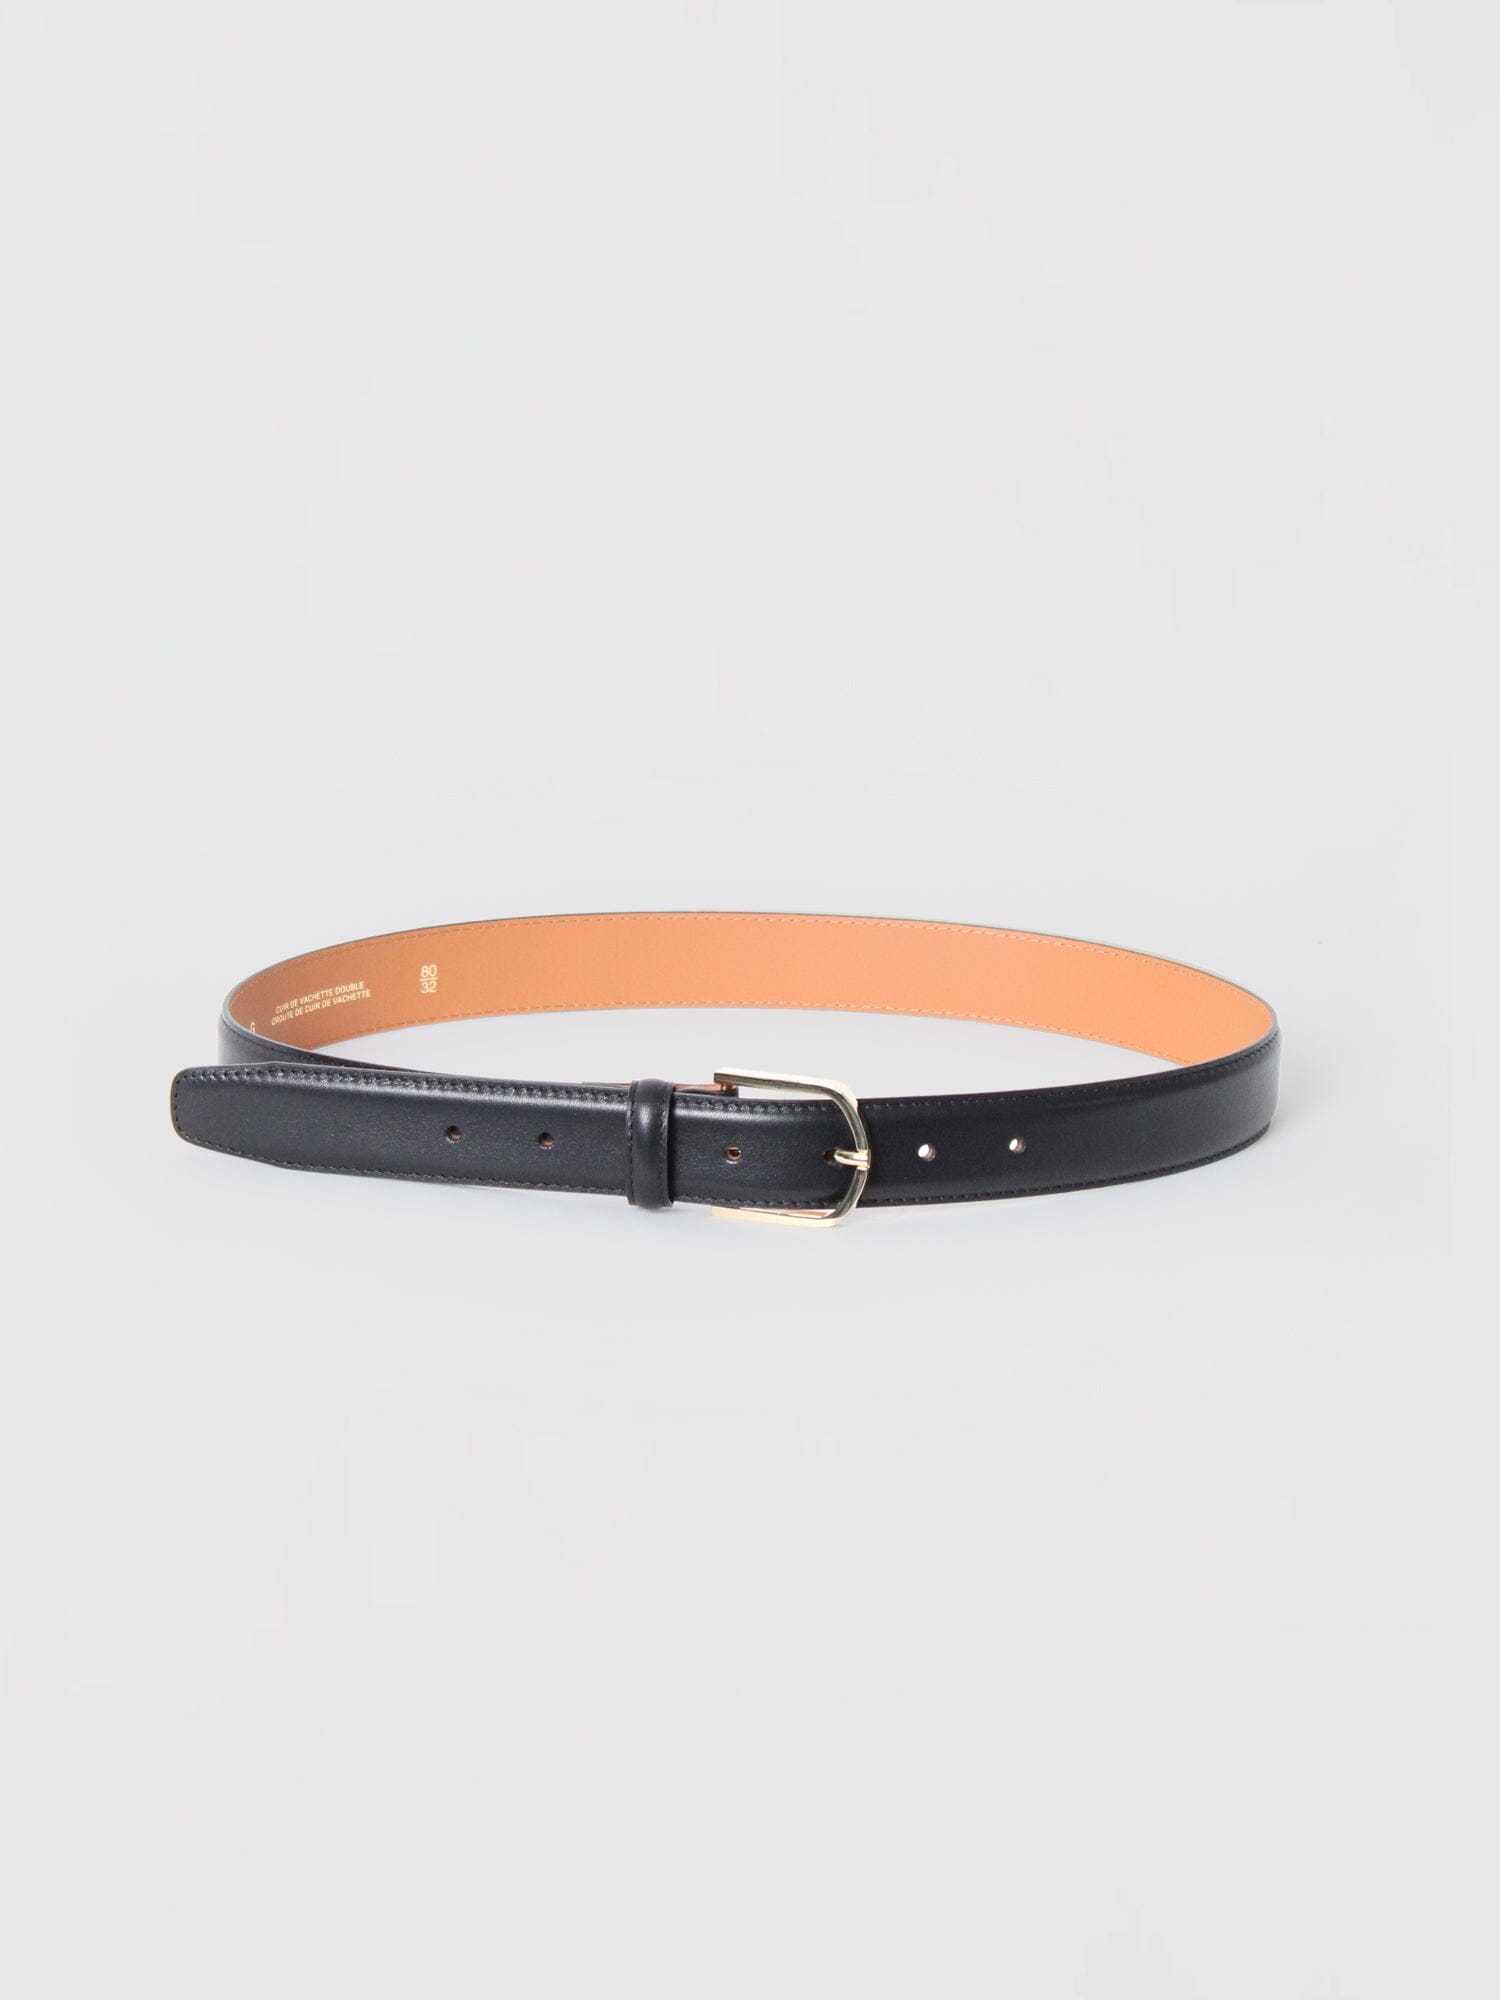 Maison Boinet 30Mm Belt Nappa Leather Lined Crust Leather